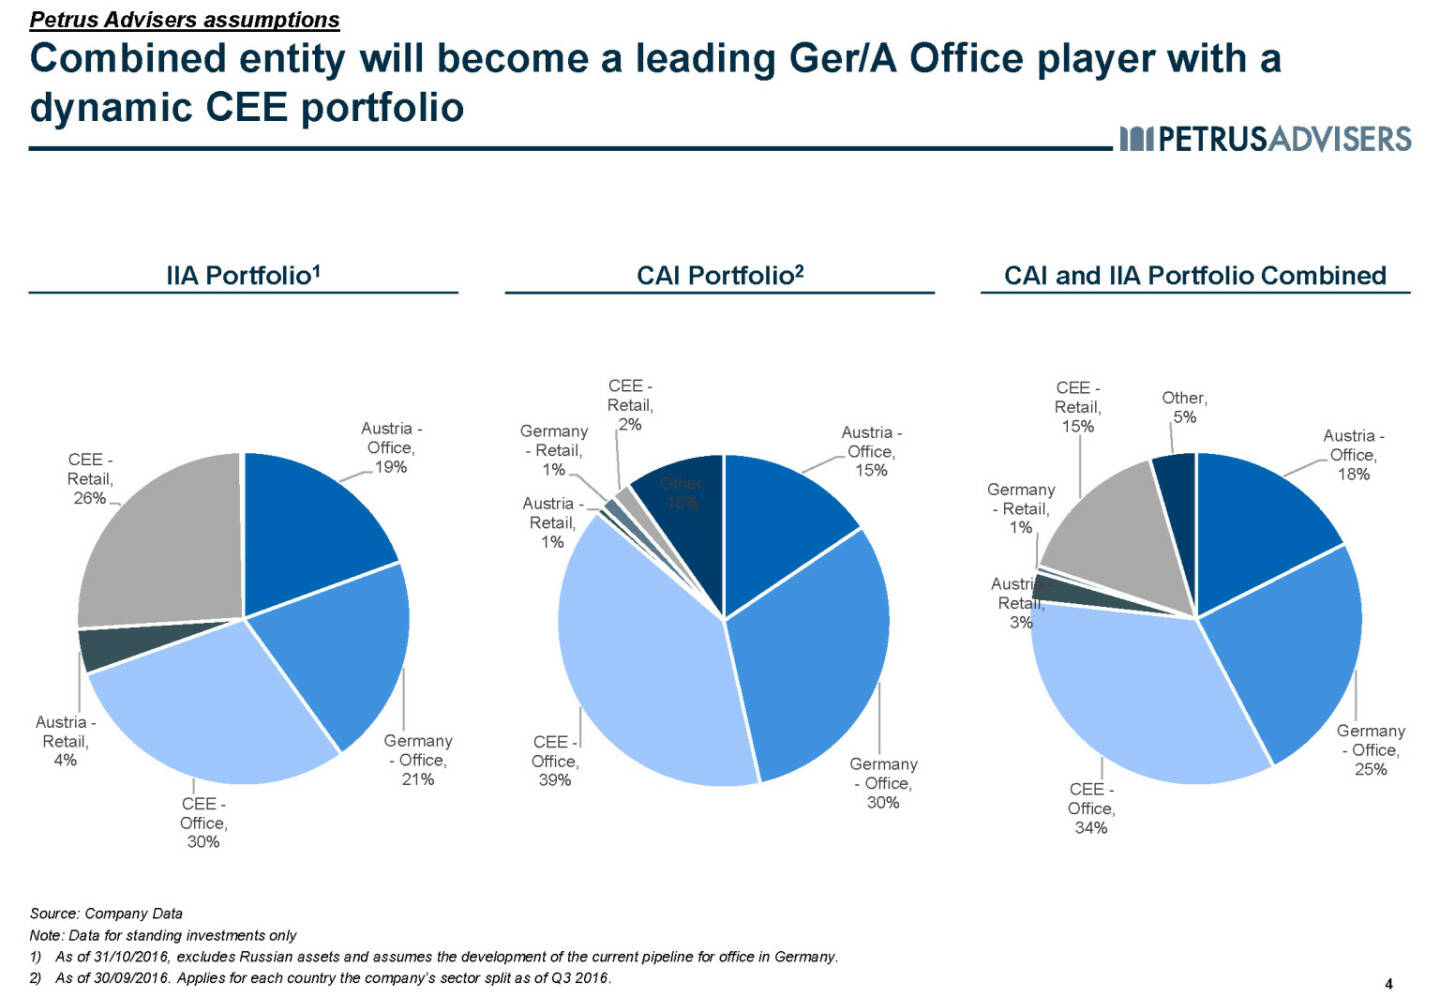 Combined entity will become a leading Ger/A Office player with a dynamic CEE portfolio - Petrus Advisers